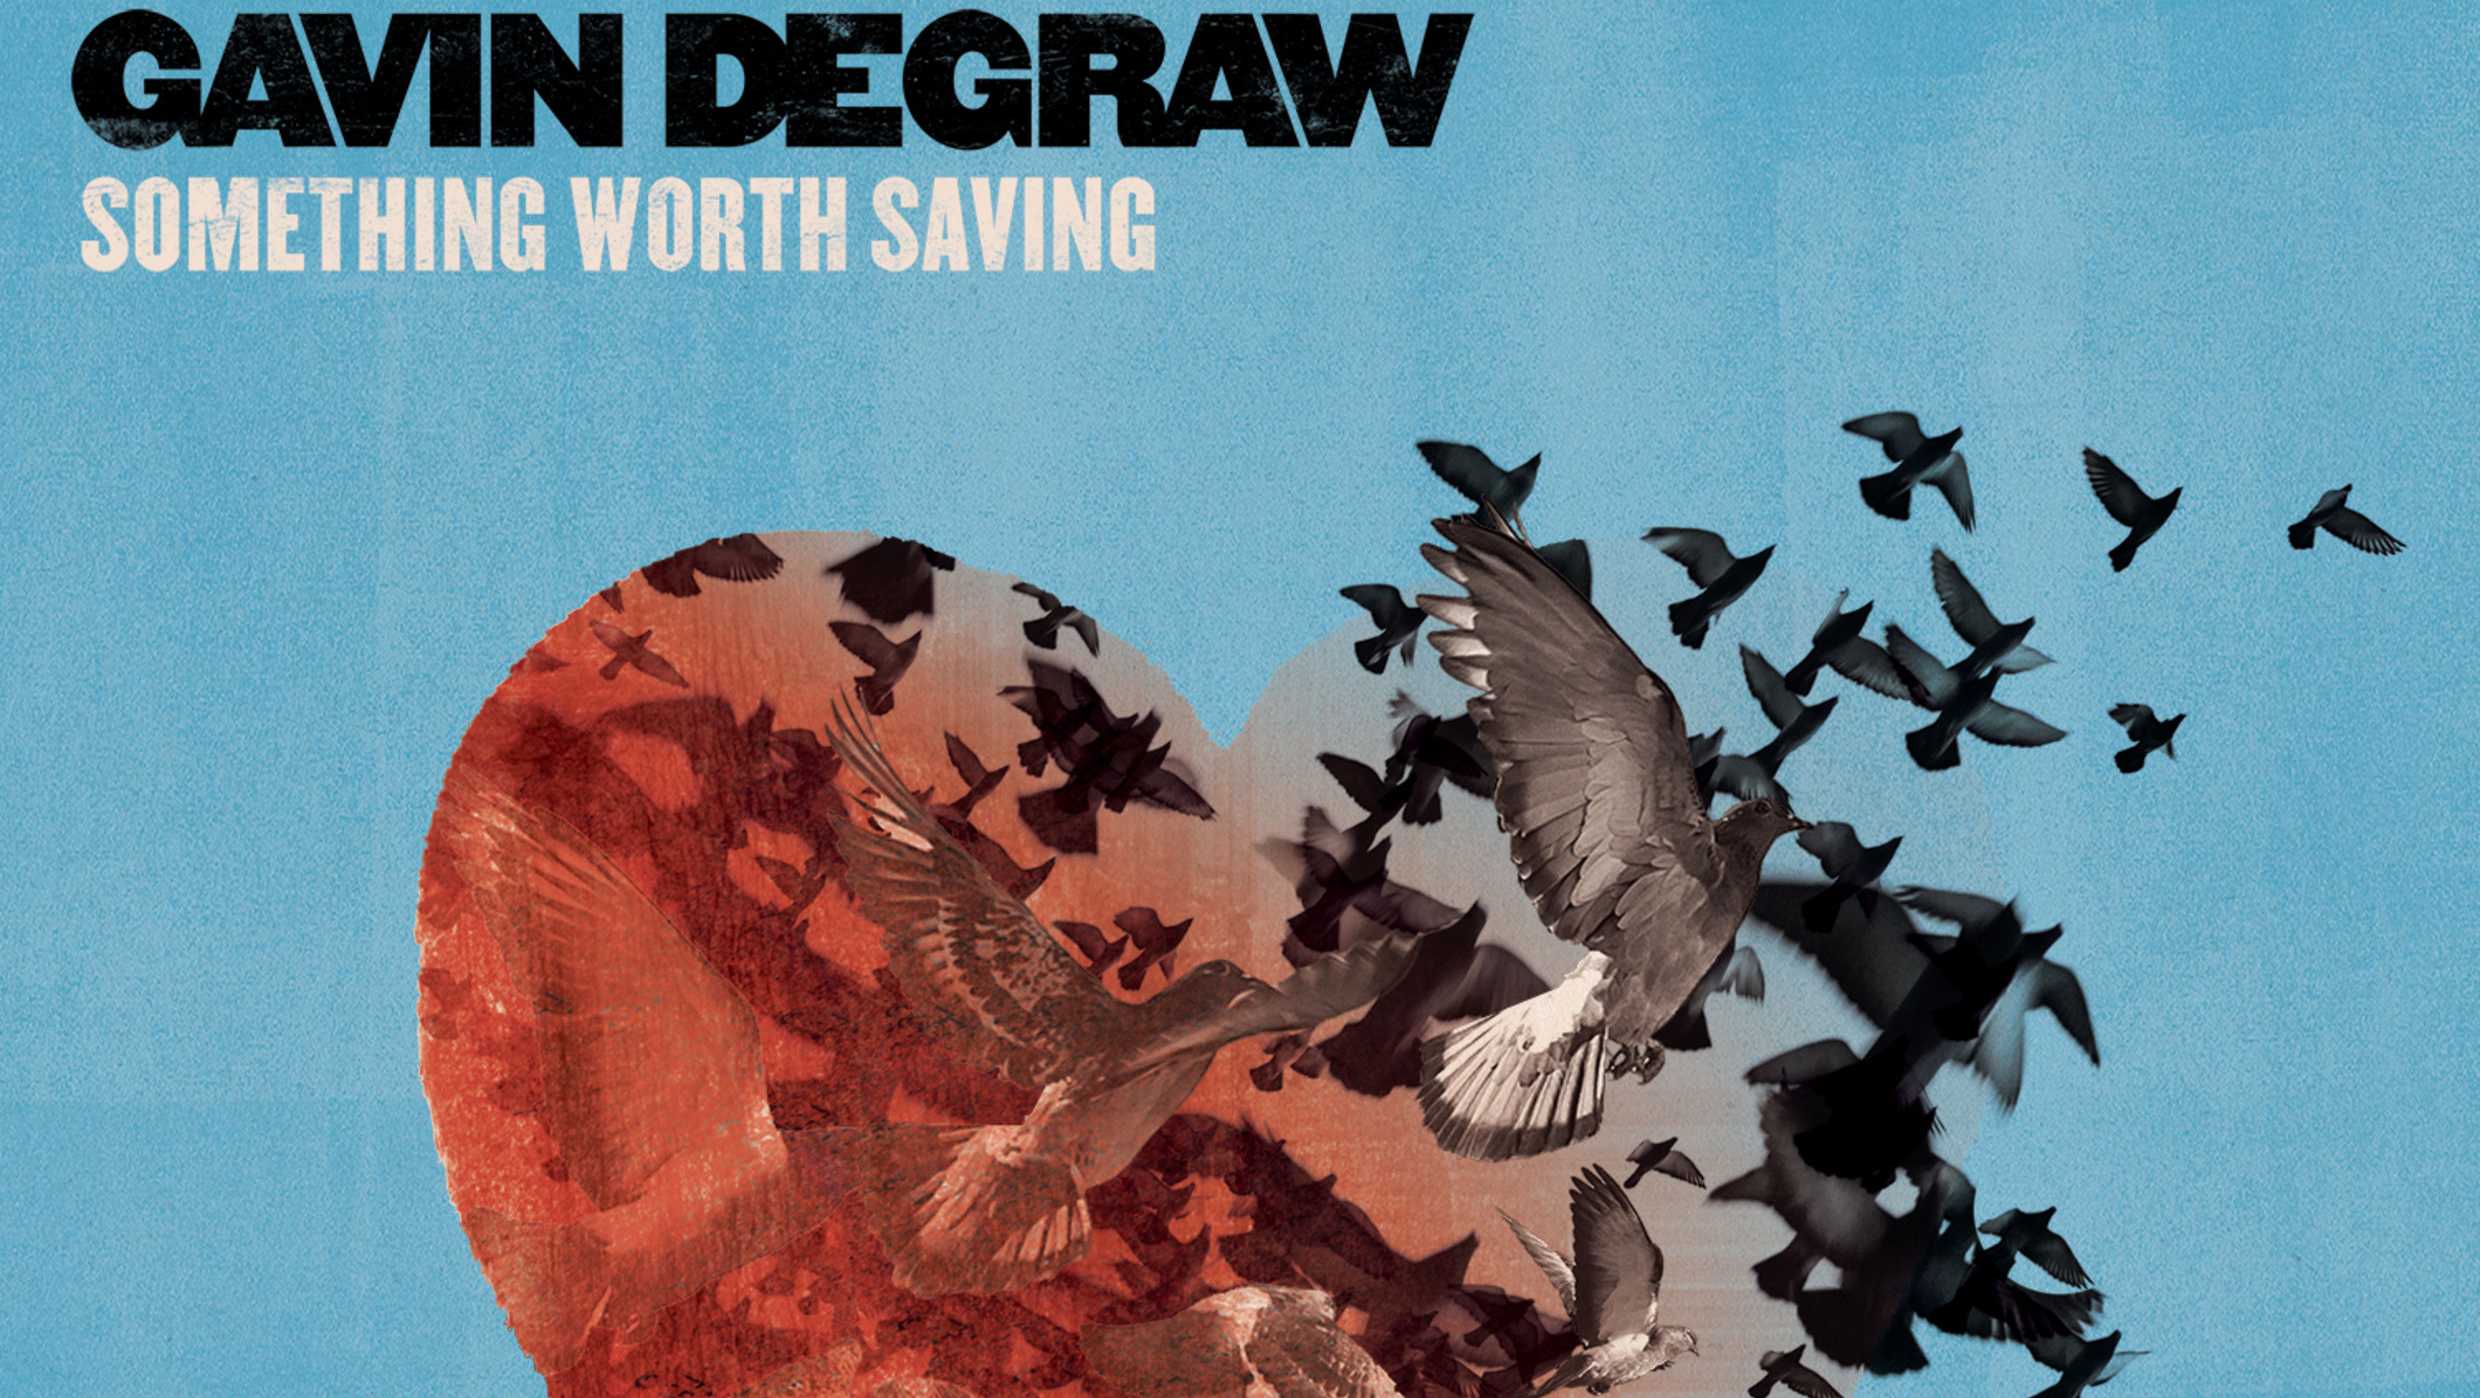 Review: DeGraw samples all genres in ‘Something Worth Saving’